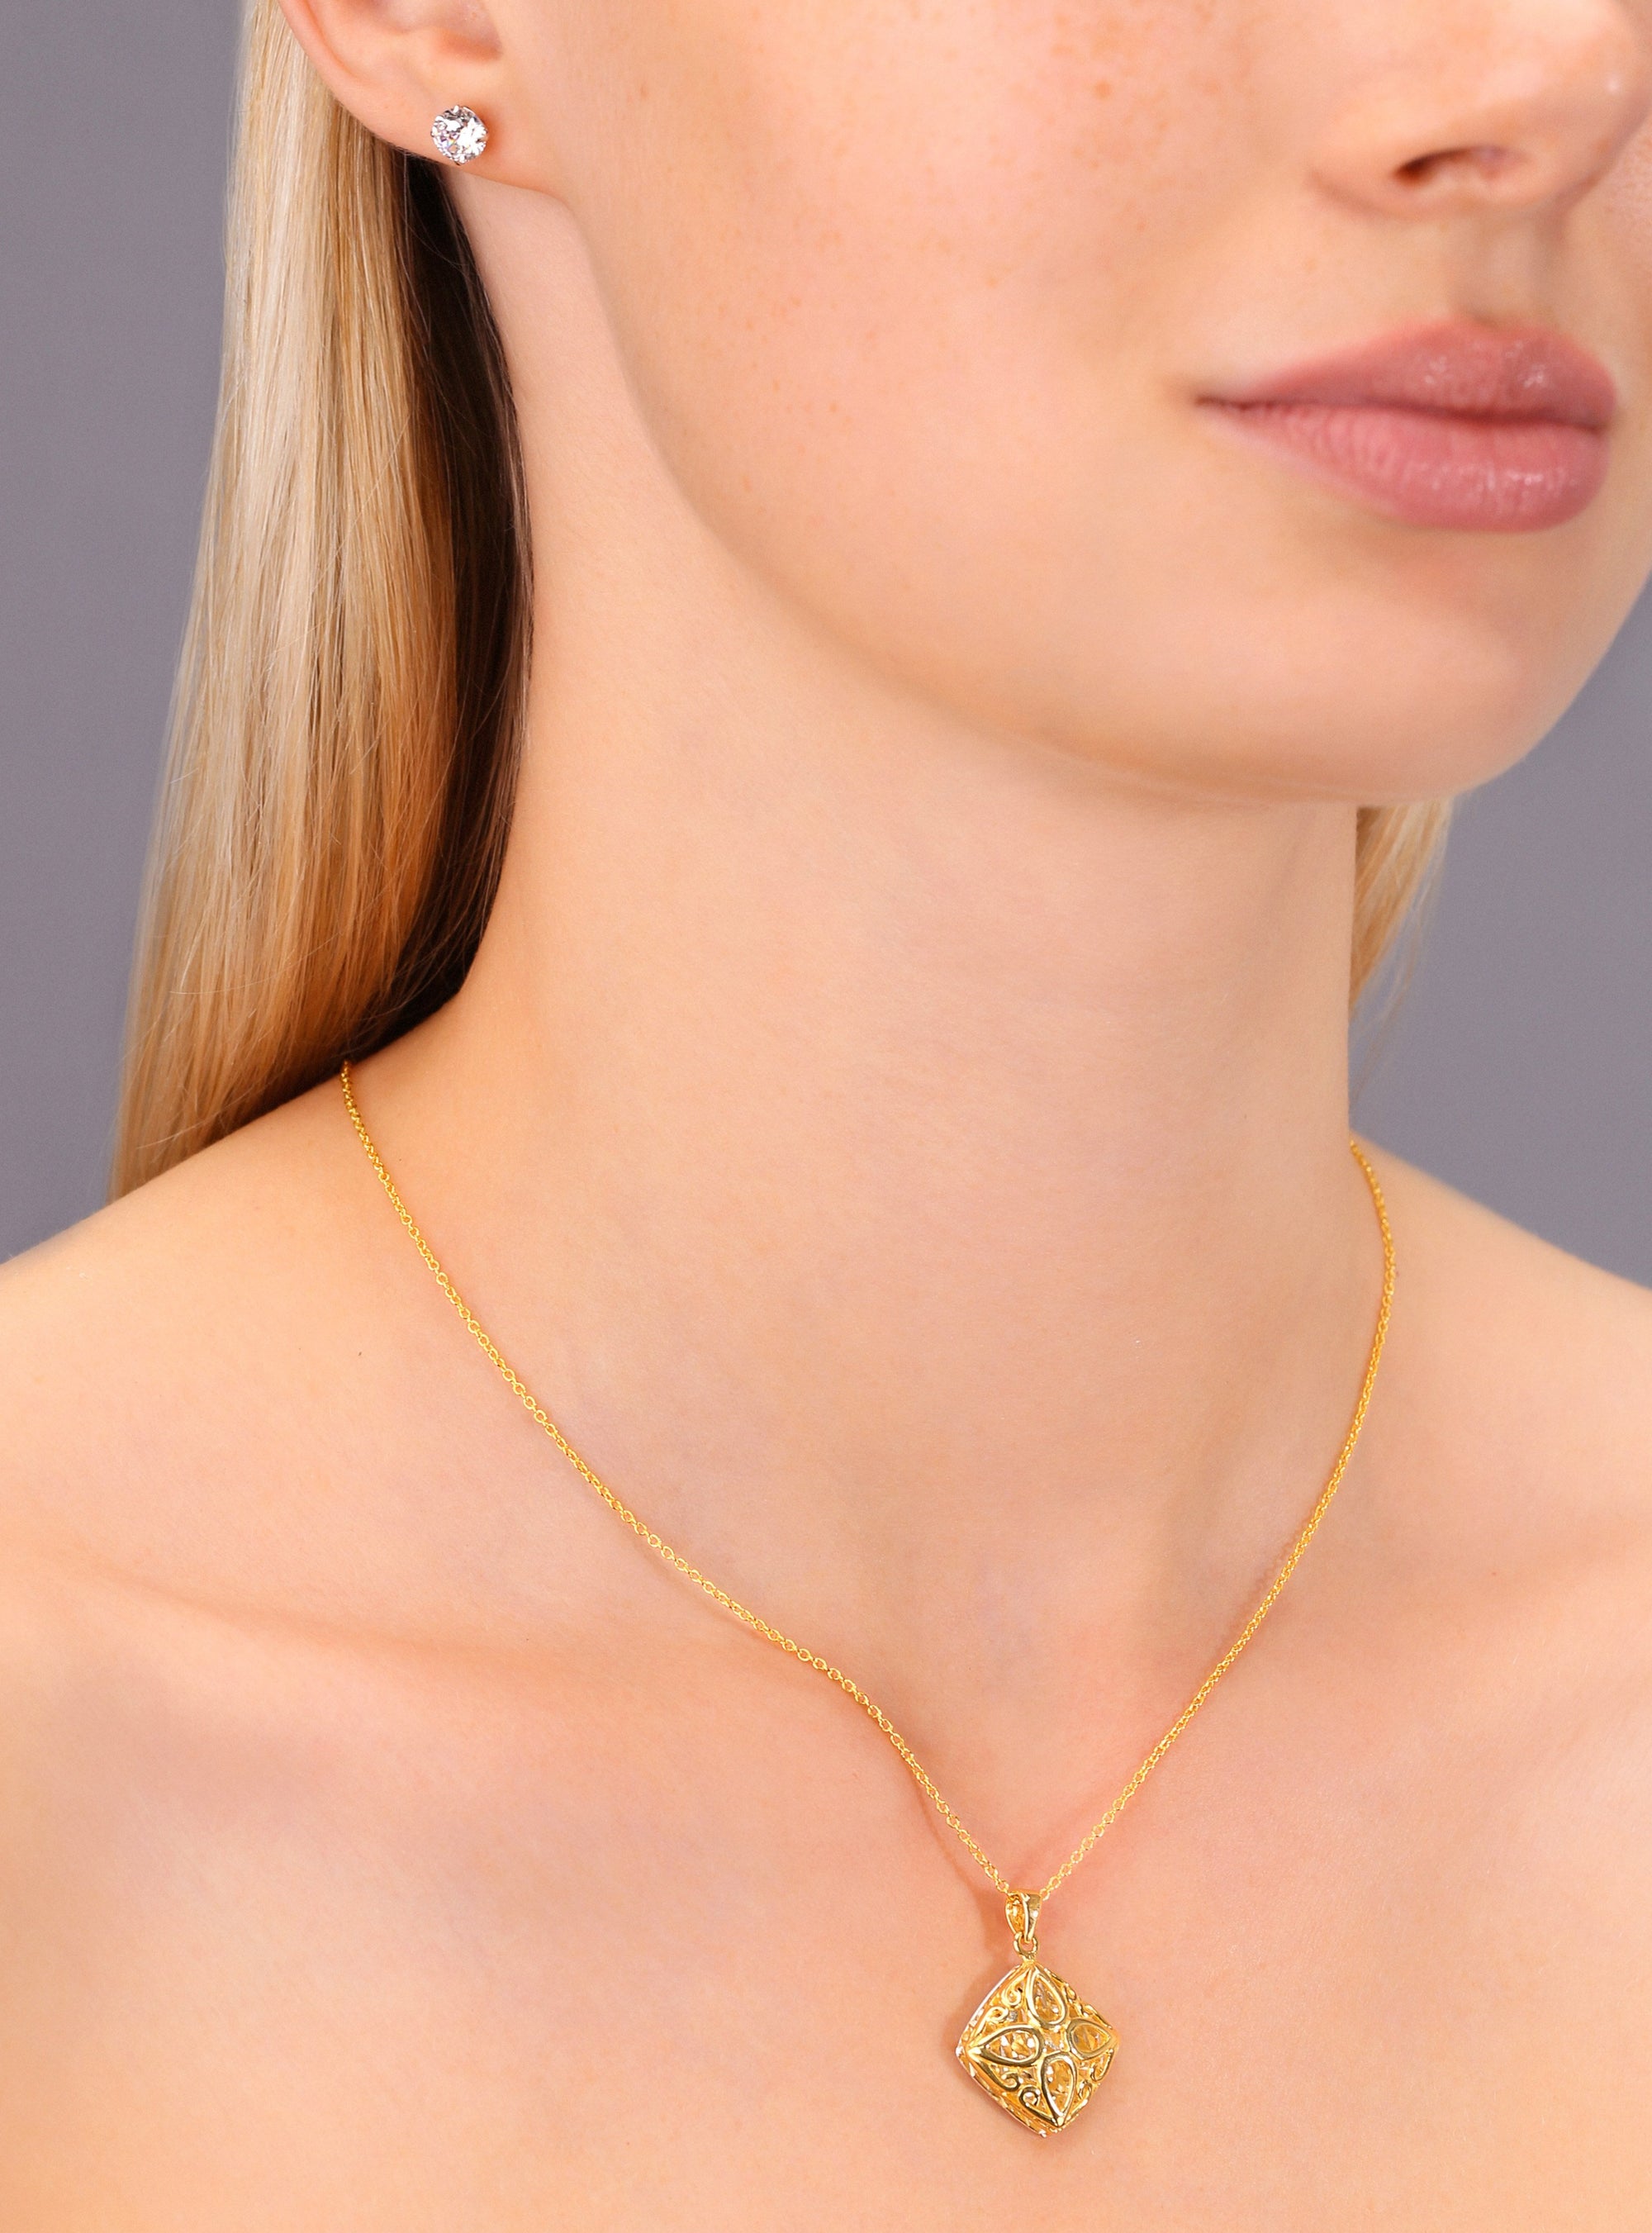 Diamond Charm Necklace, Yellow Gold Plated in Sterling Silver